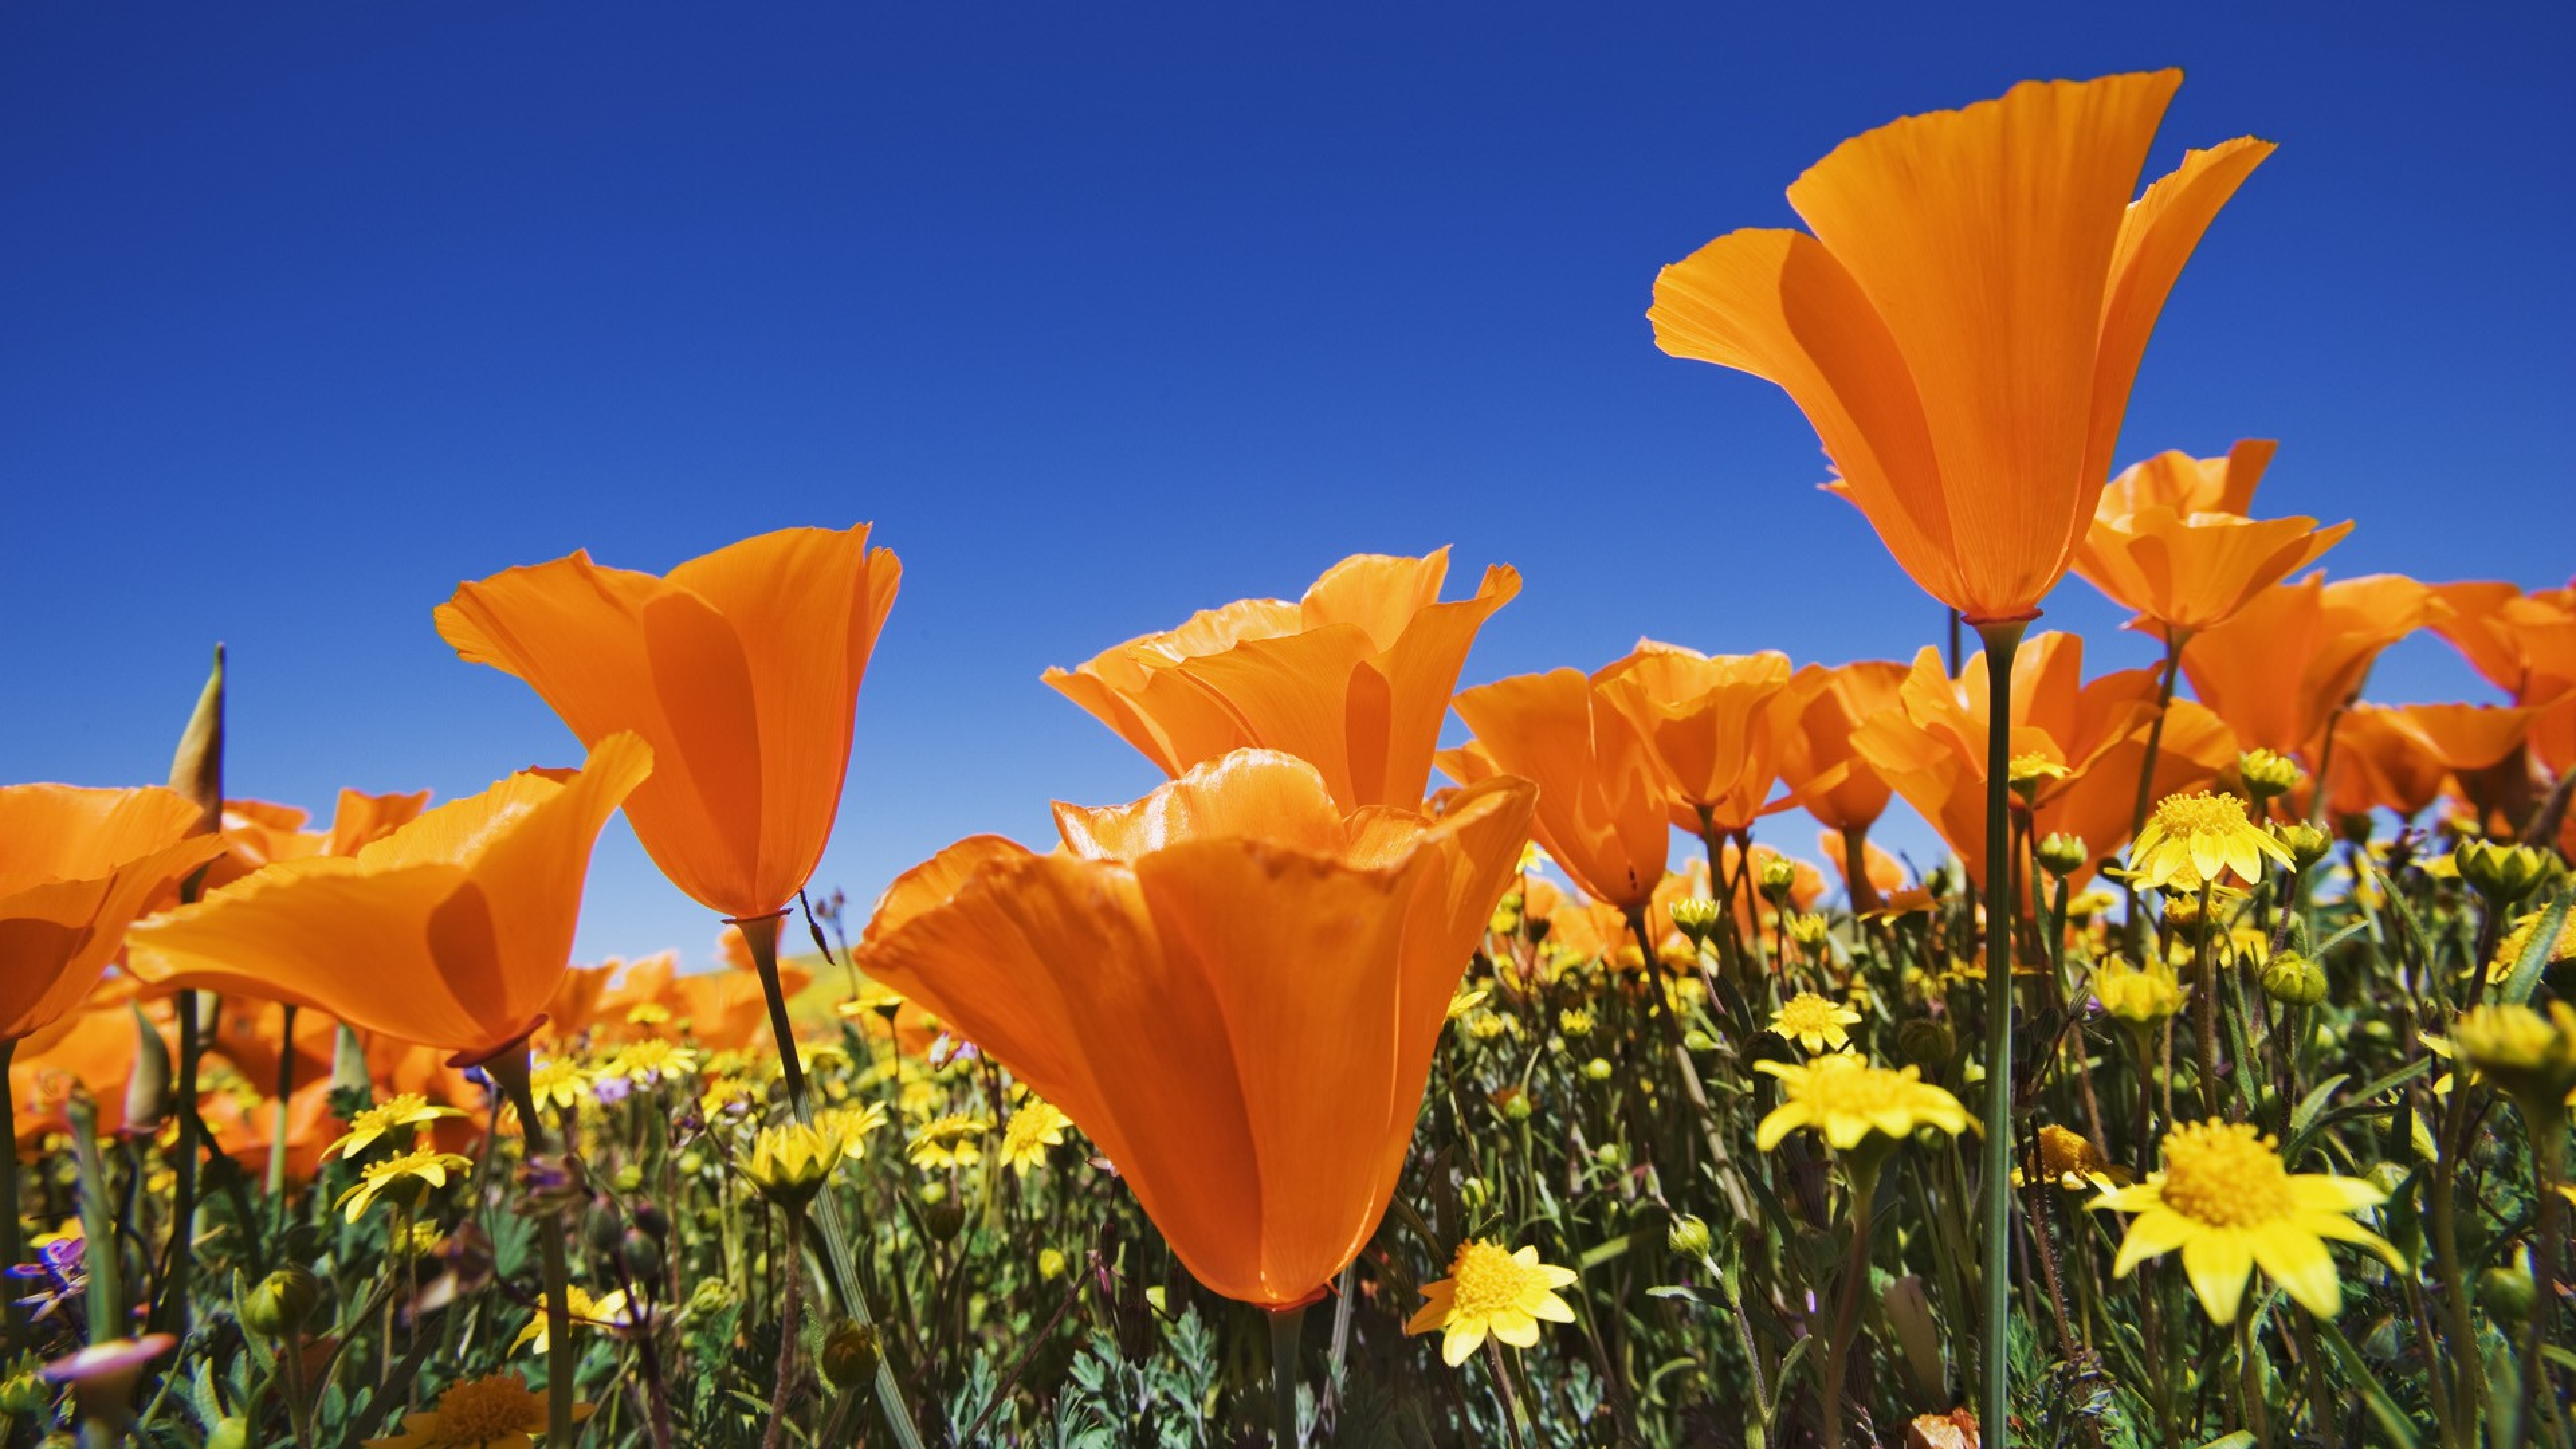 Antelope Valley California Poppy Reserve, USA 4k Ultra HD Wallpaper and Background Image